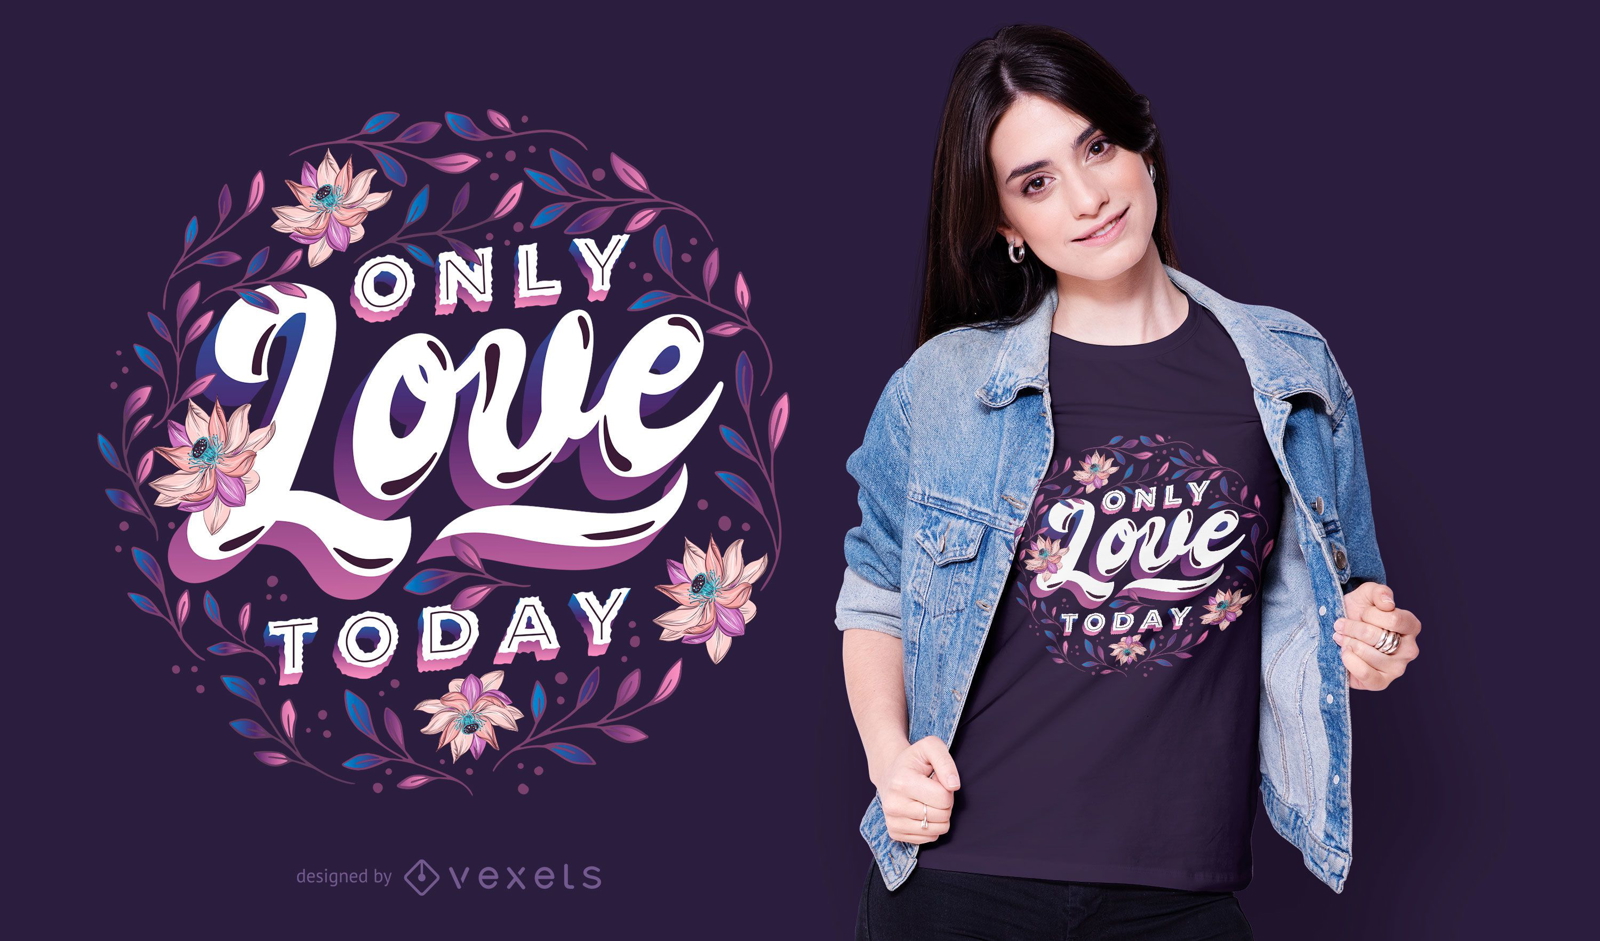 Only love today t-shirt design